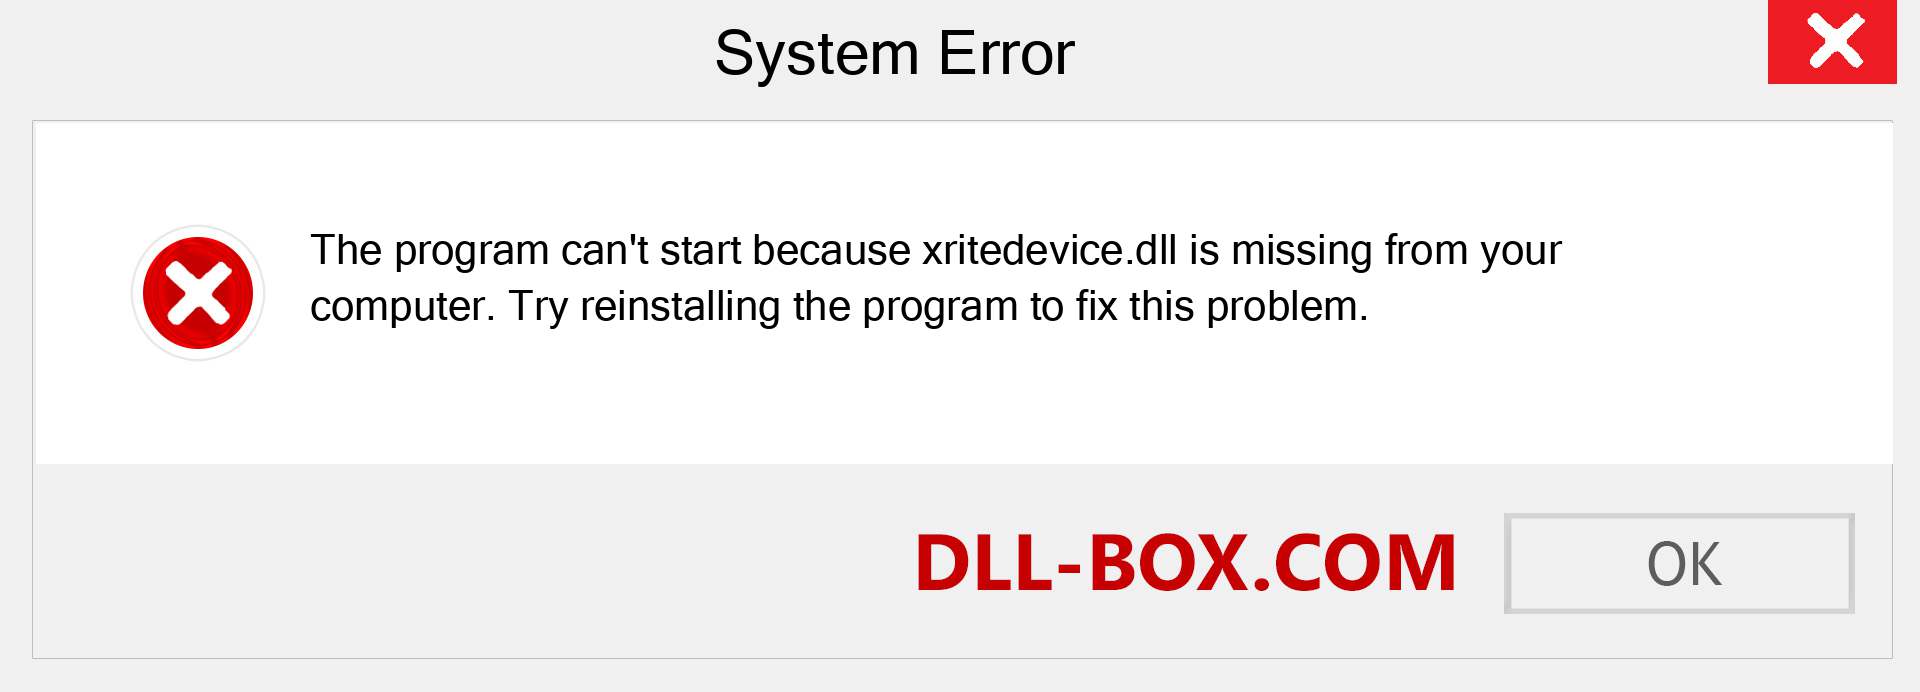  xritedevice.dll file is missing?. Download for Windows 7, 8, 10 - Fix  xritedevice dll Missing Error on Windows, photos, images